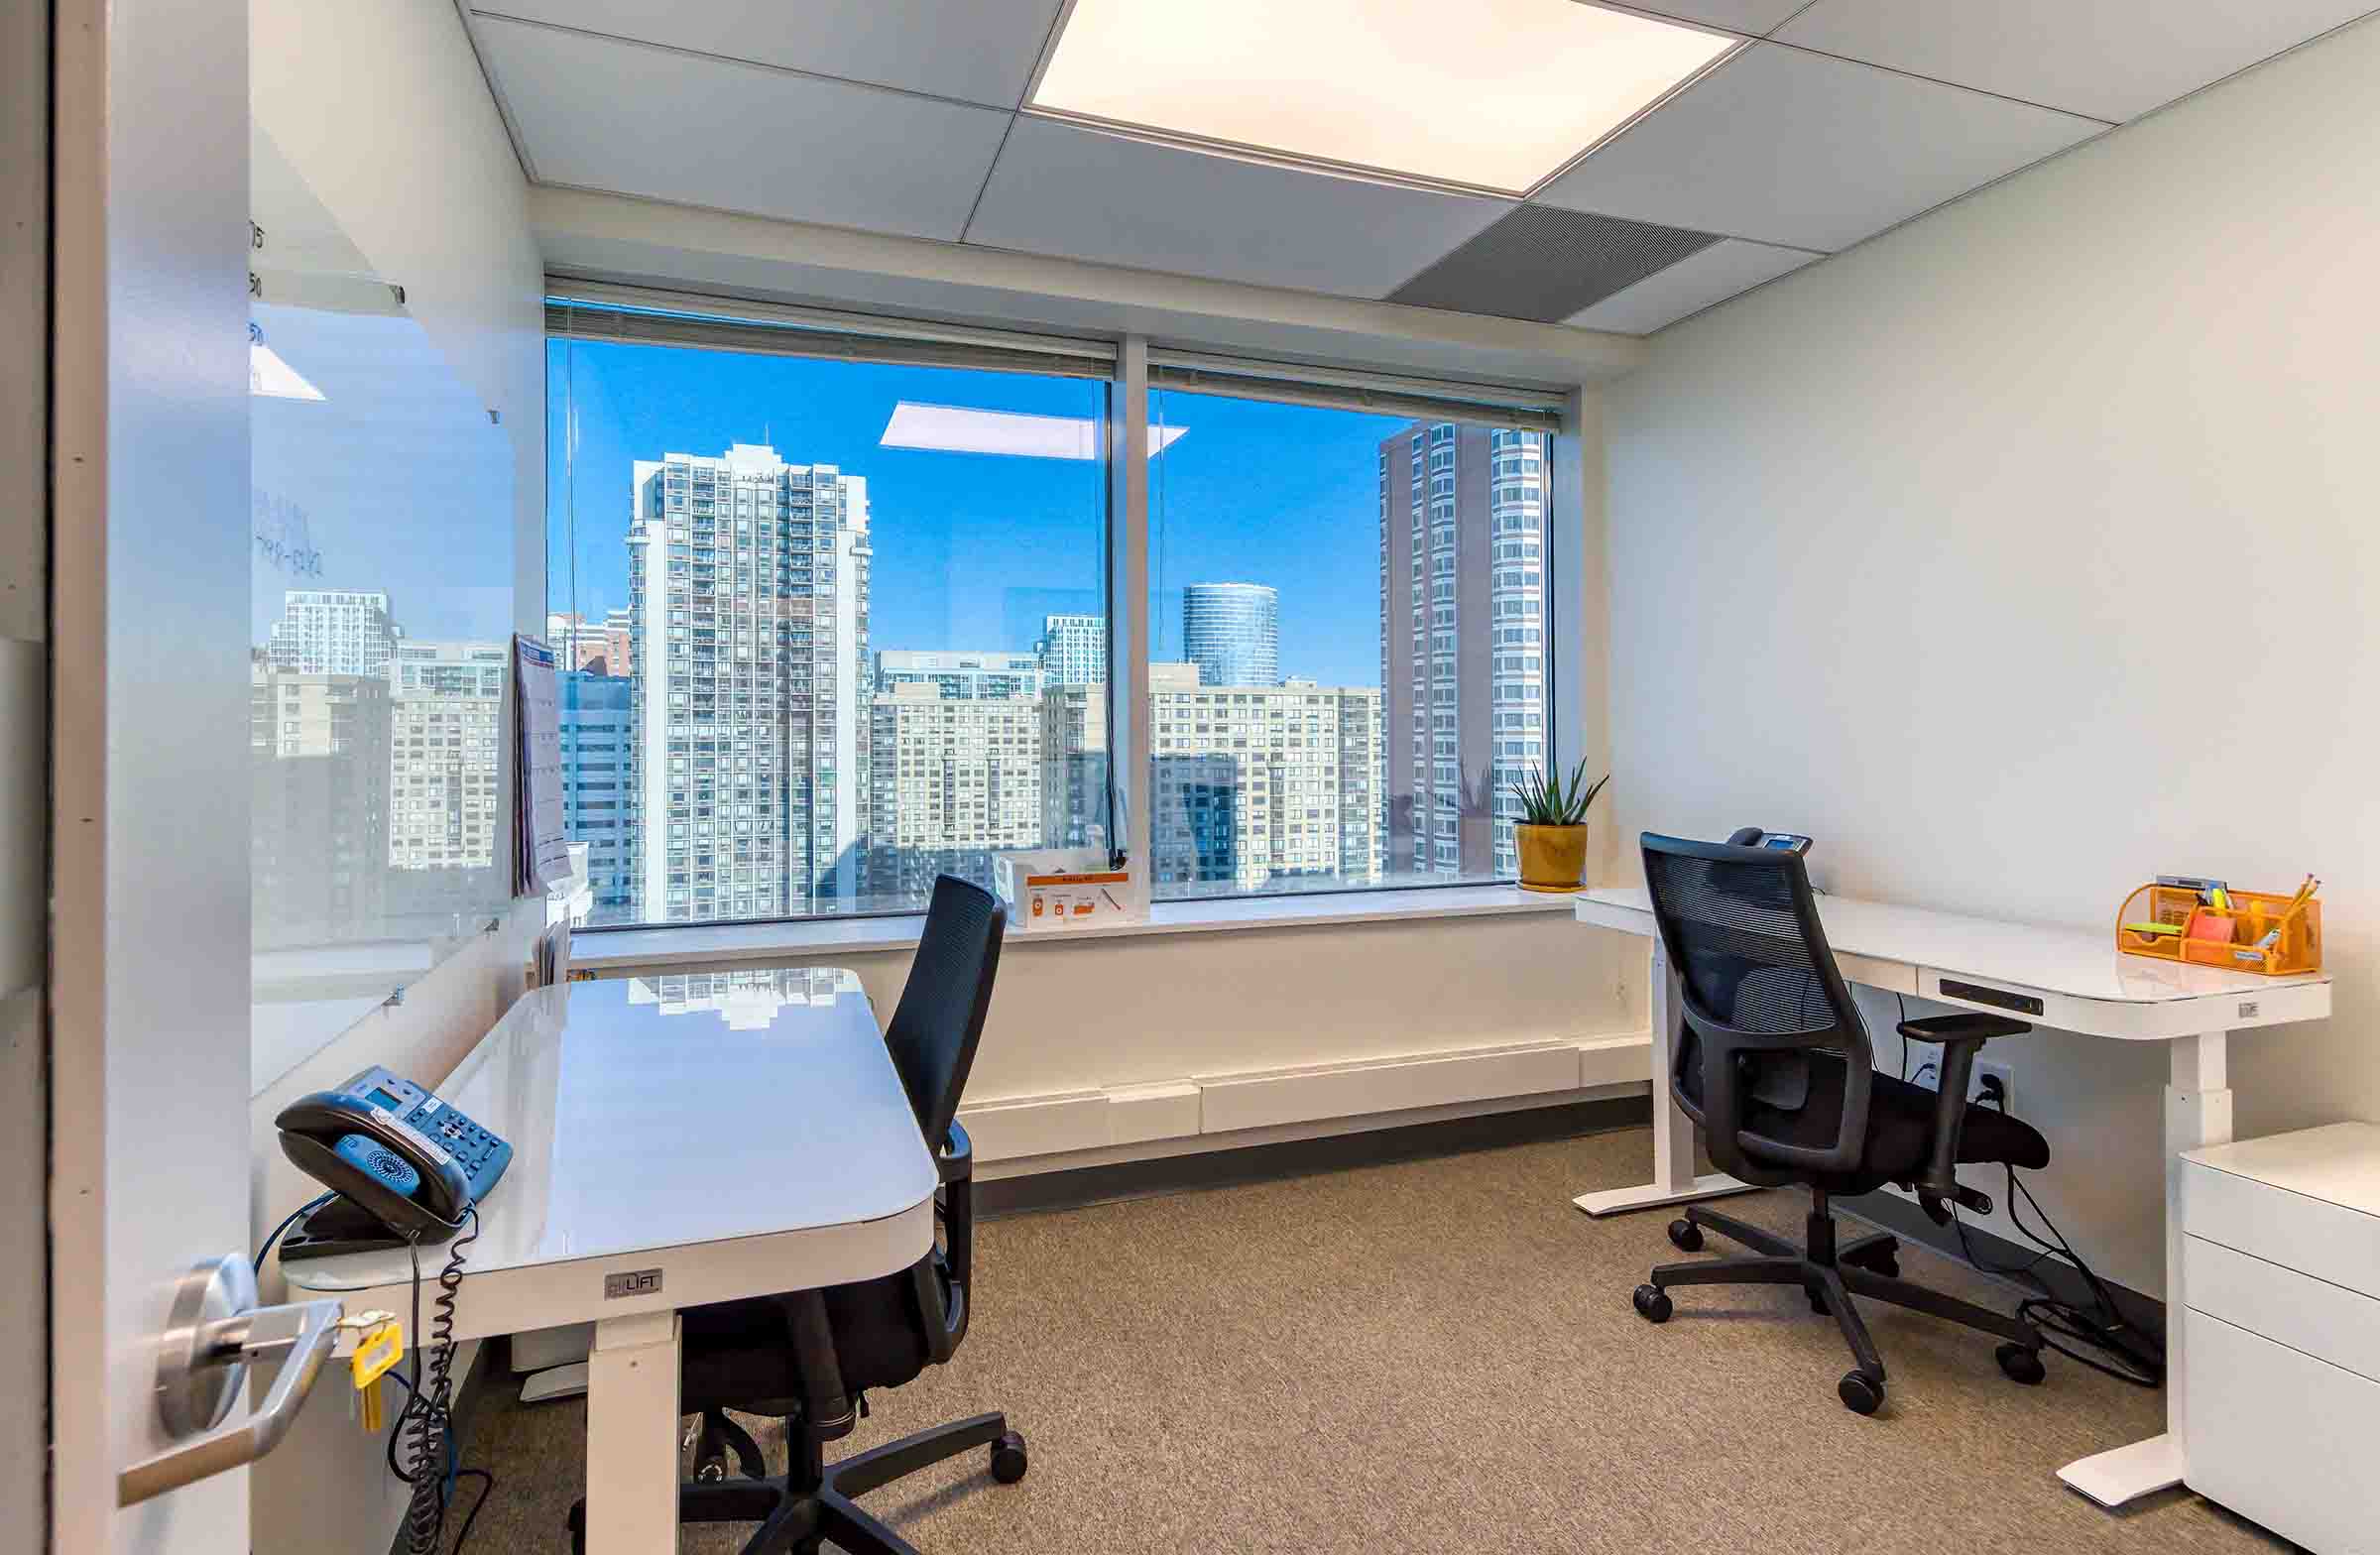 Fully furnished private office space with flexible plans offering stunning views of the Jersey City